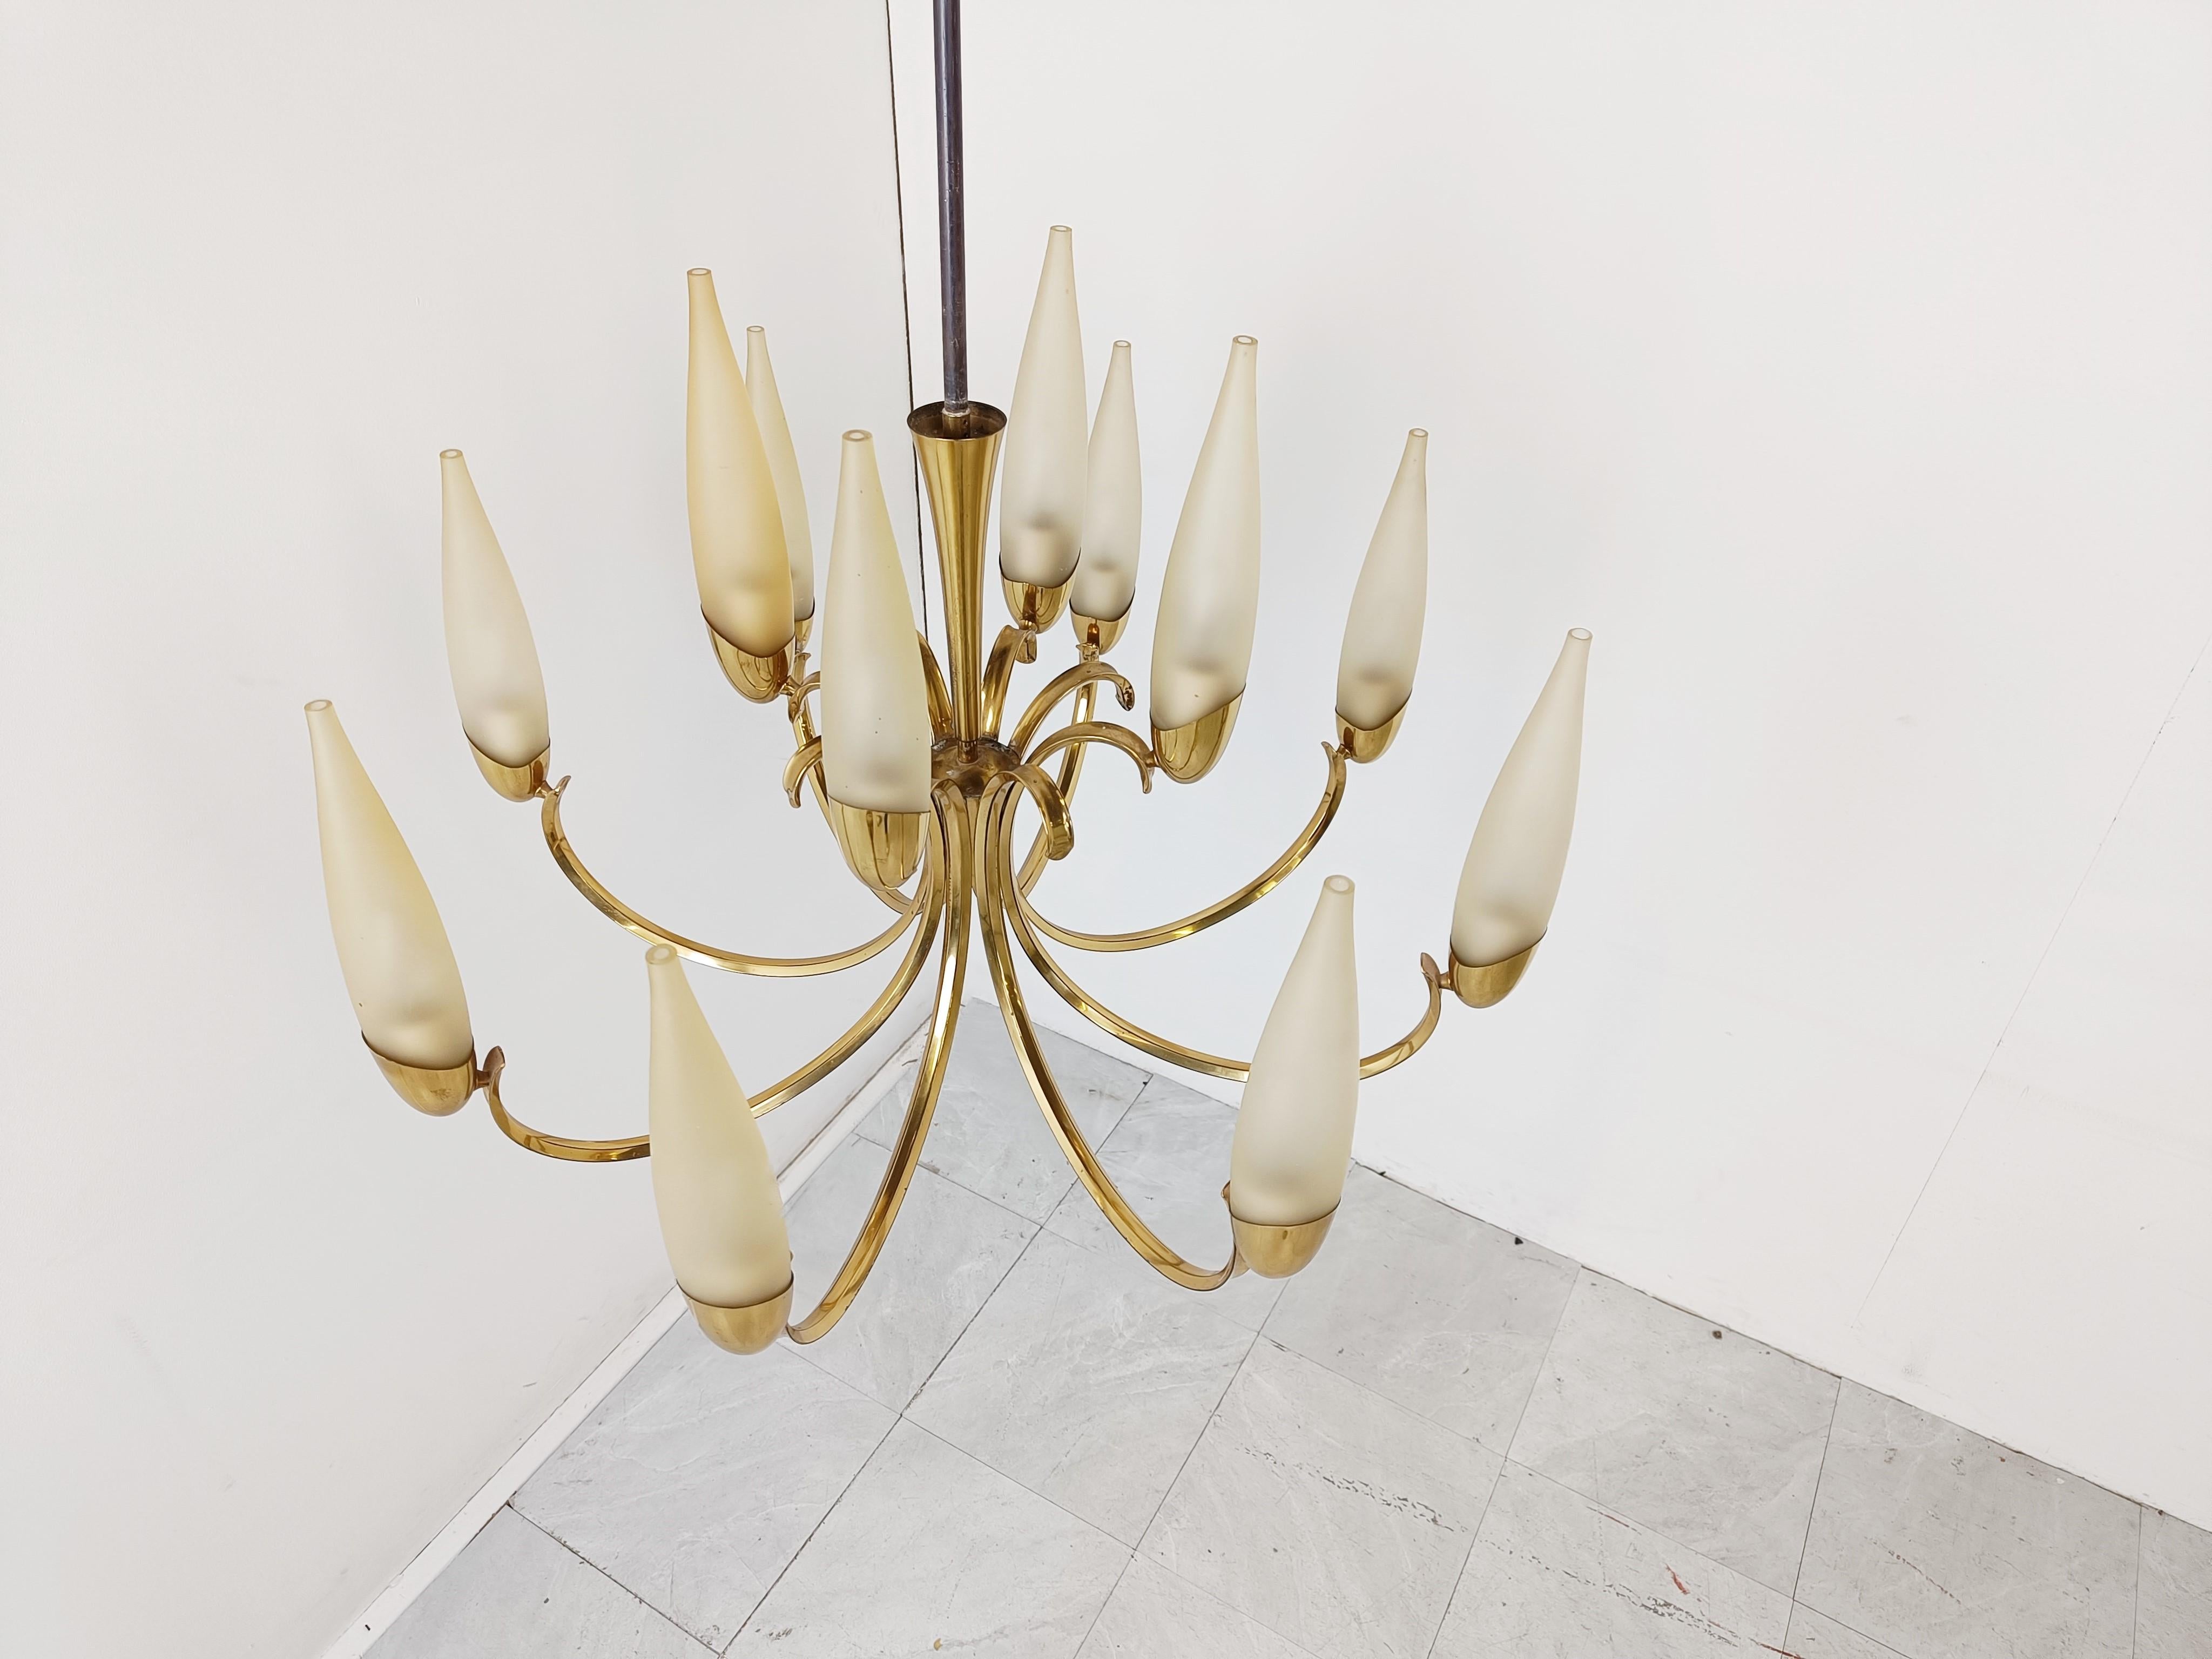 Midcentury brass chandelier with two levels and 12 lightpoints wit matte glass finely shaped lamp shades.

Striking design and it emits a beautiful light.

Good condition.

Tested and ready to use. 

Works with e14 light bulbs.

1960s -